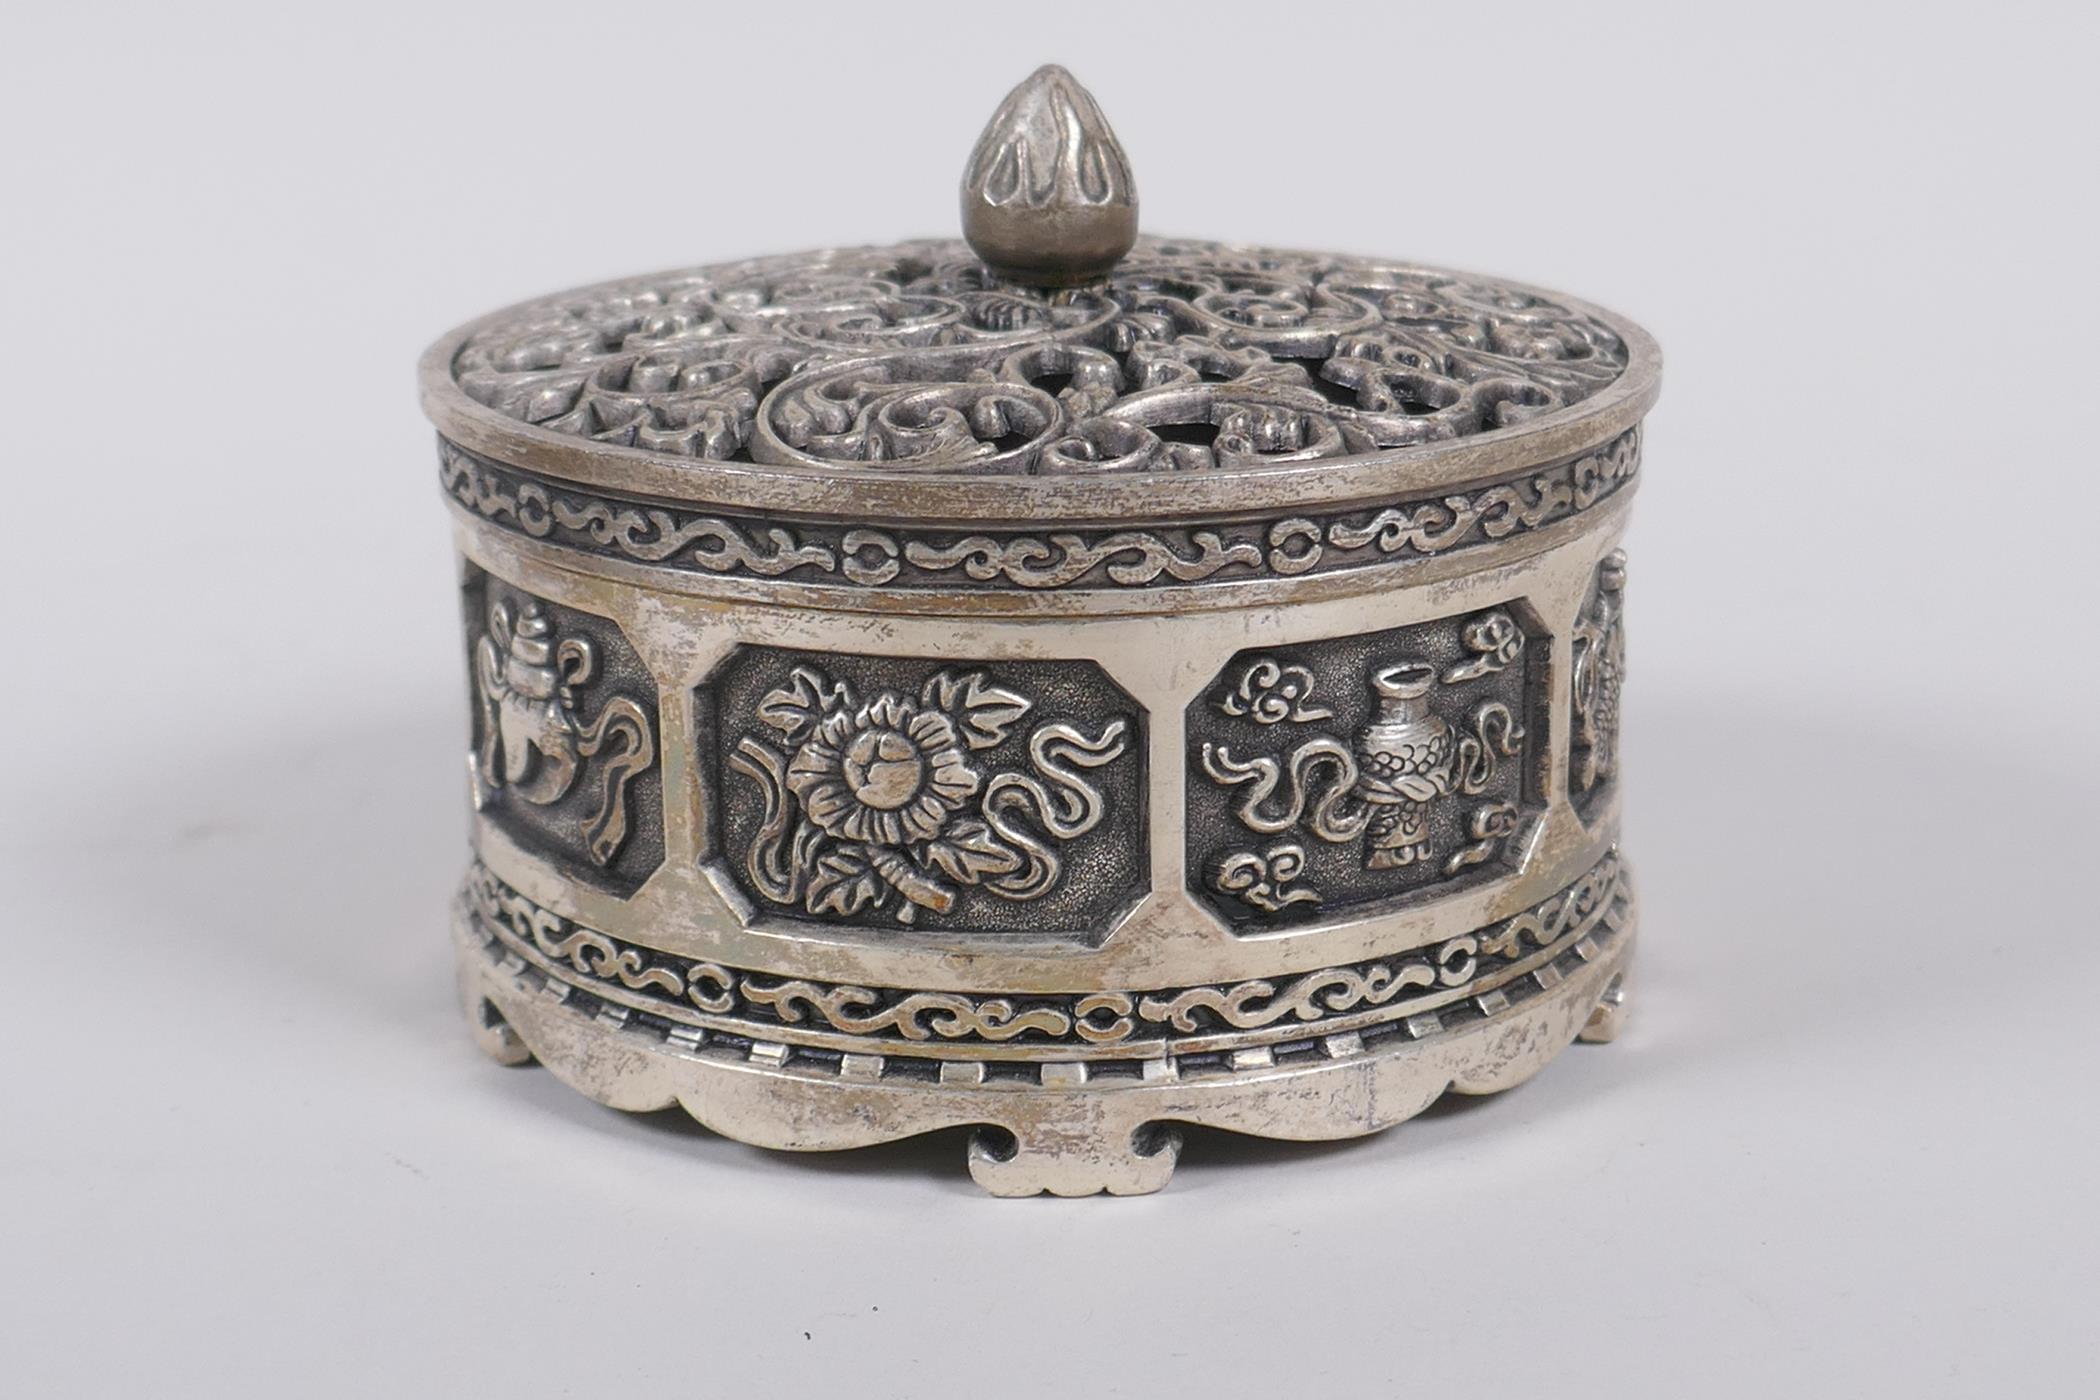 A Sino Tibetan white metal cylinder censer and cover, decorated with the emblems of the eight